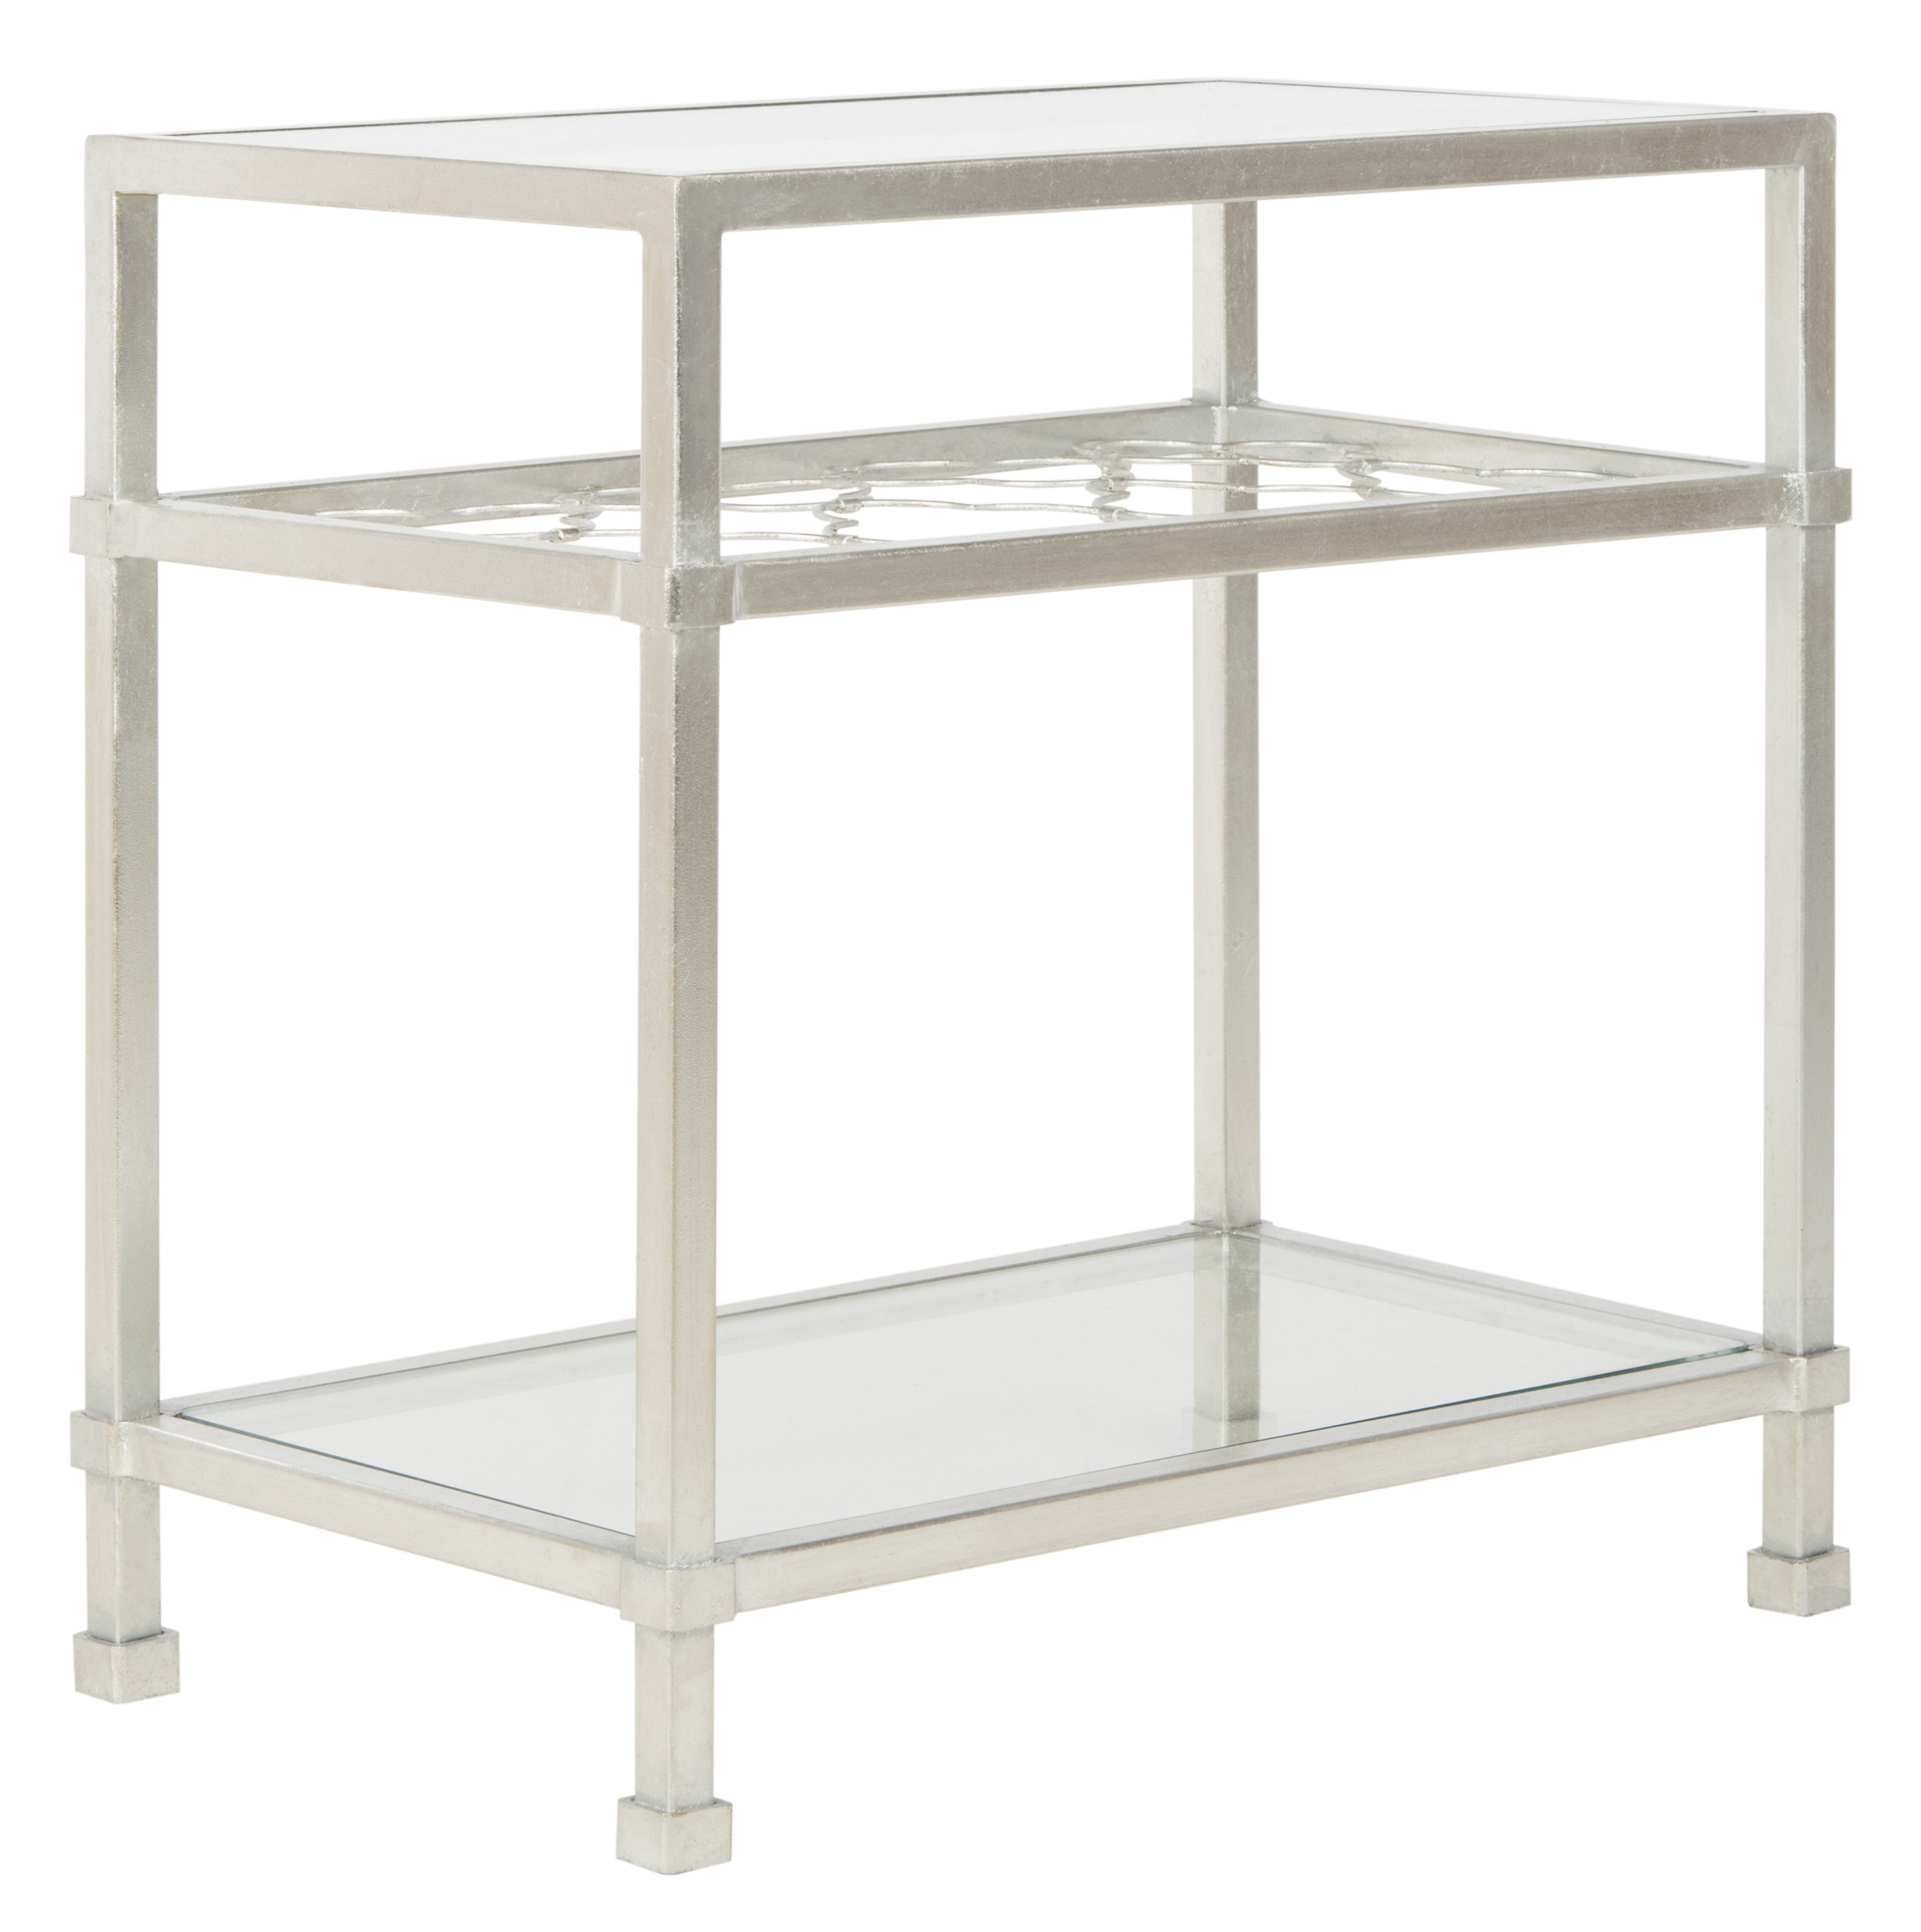 Hanzel Silver Leaf Glass Side Table - Silver - Arlo Home - Image 1